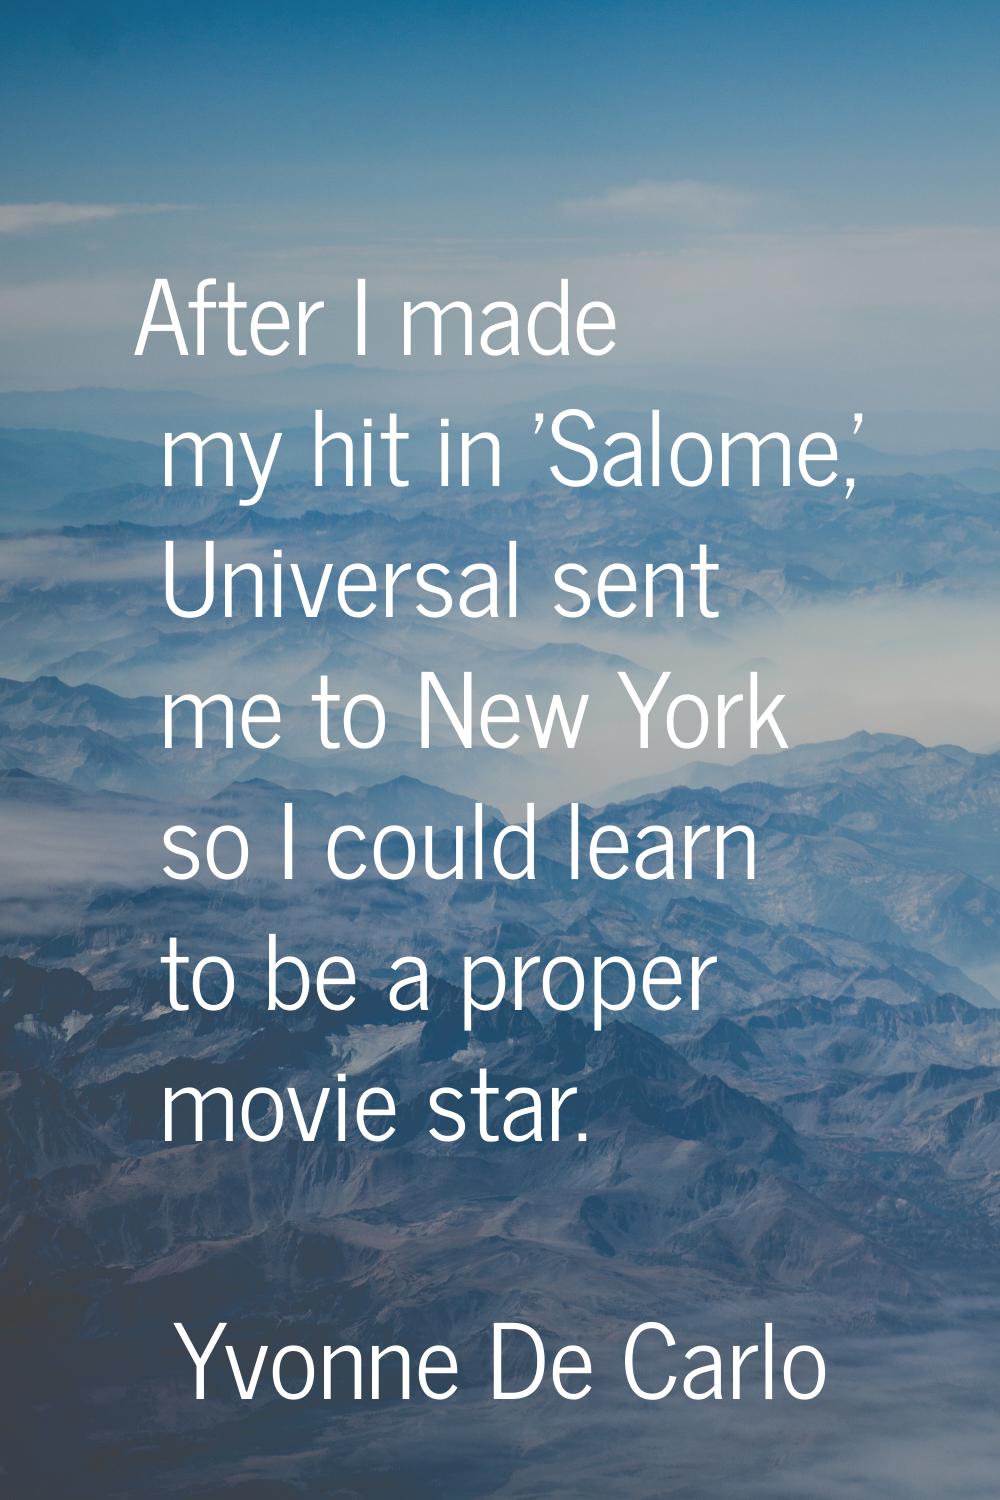 After I made my hit in 'Salome,' Universal sent me to New York so I could learn to be a proper movi